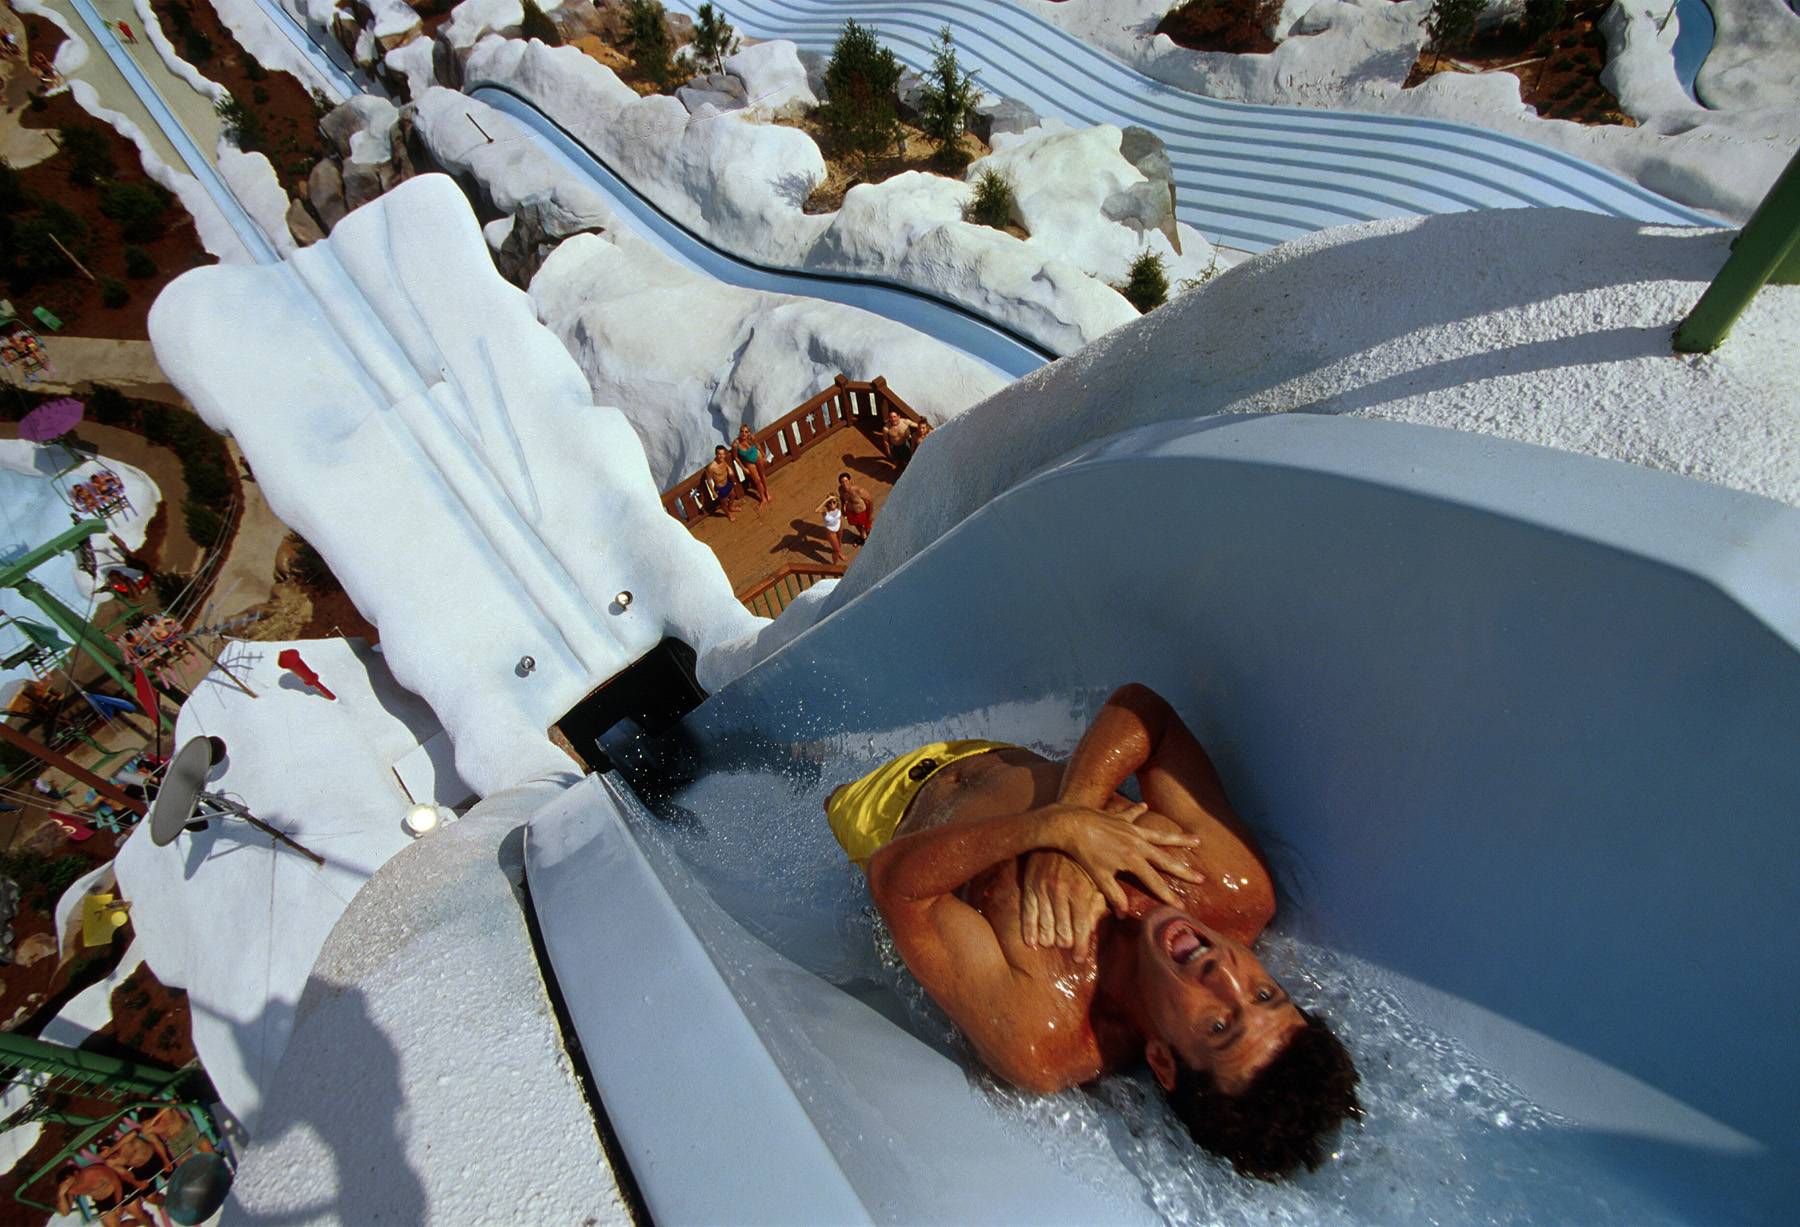 Blizzard Beach closing for extended refurbishment this year with enhancements coming